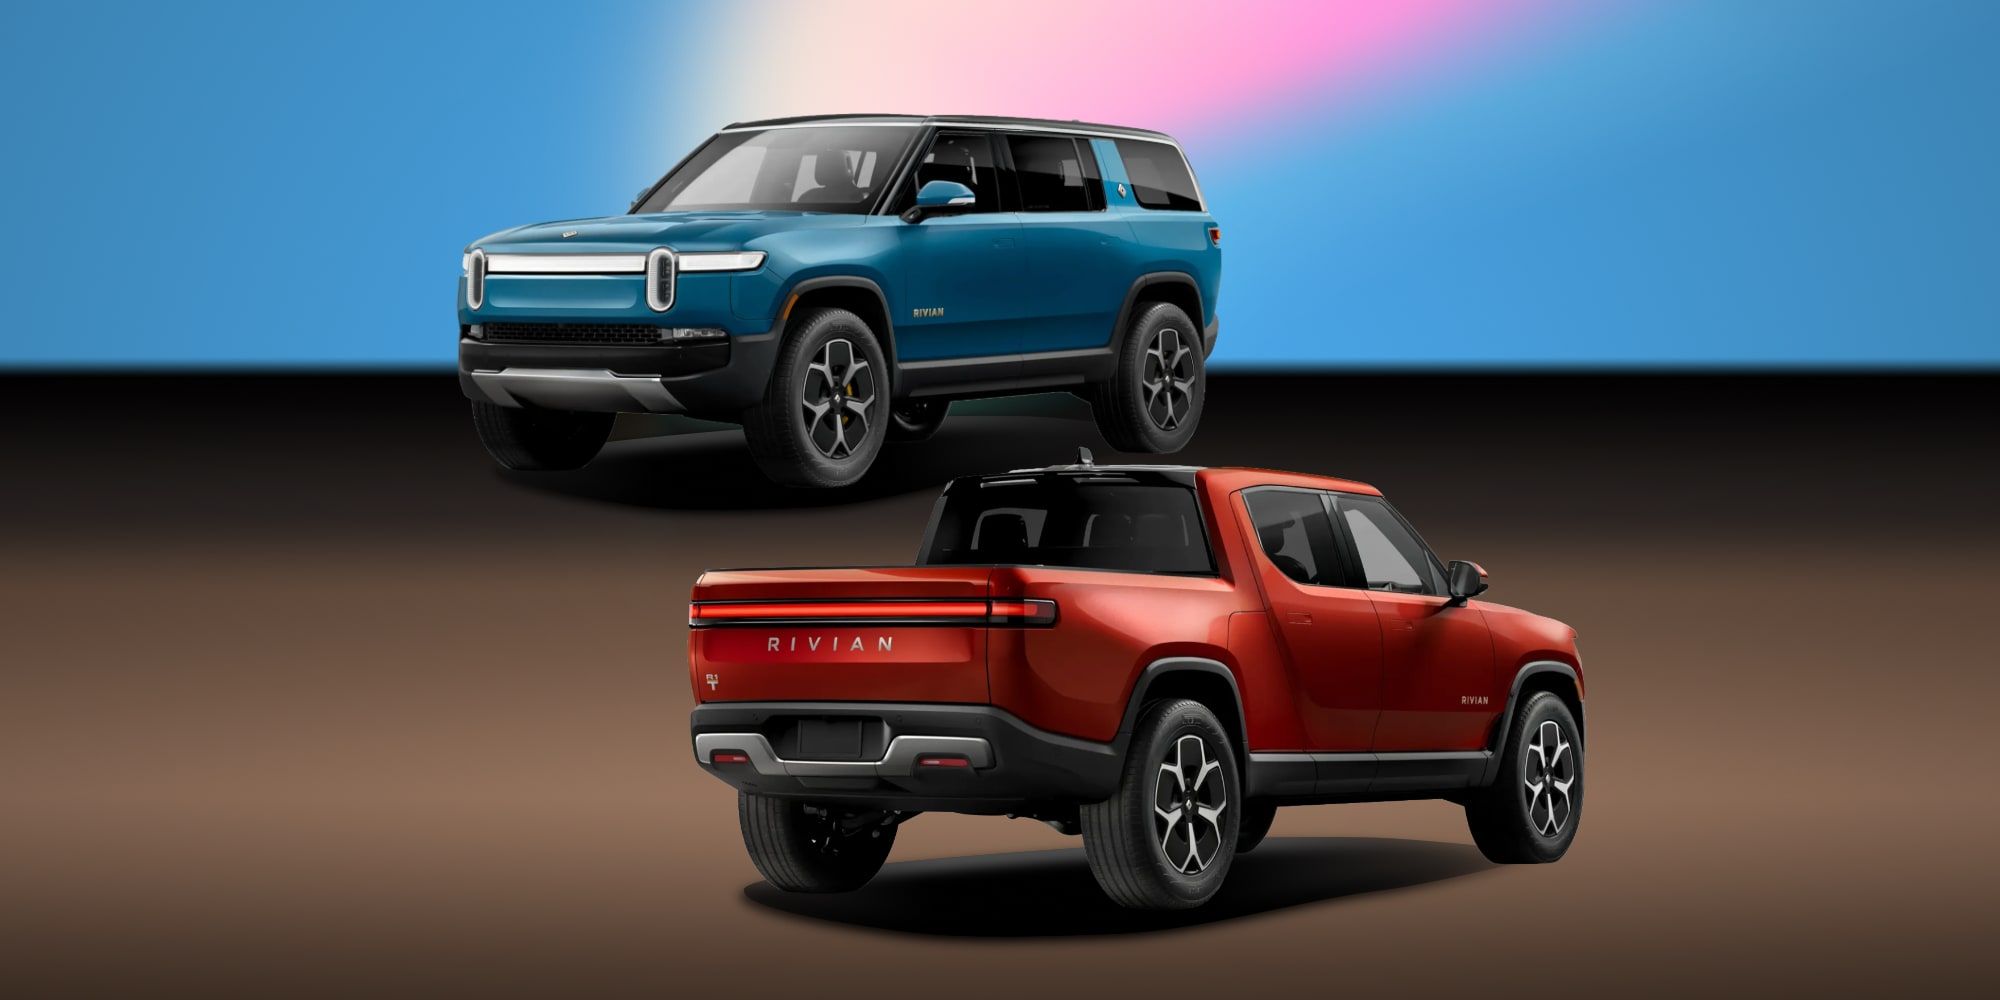 The Rivian R1T And R1S EVs 